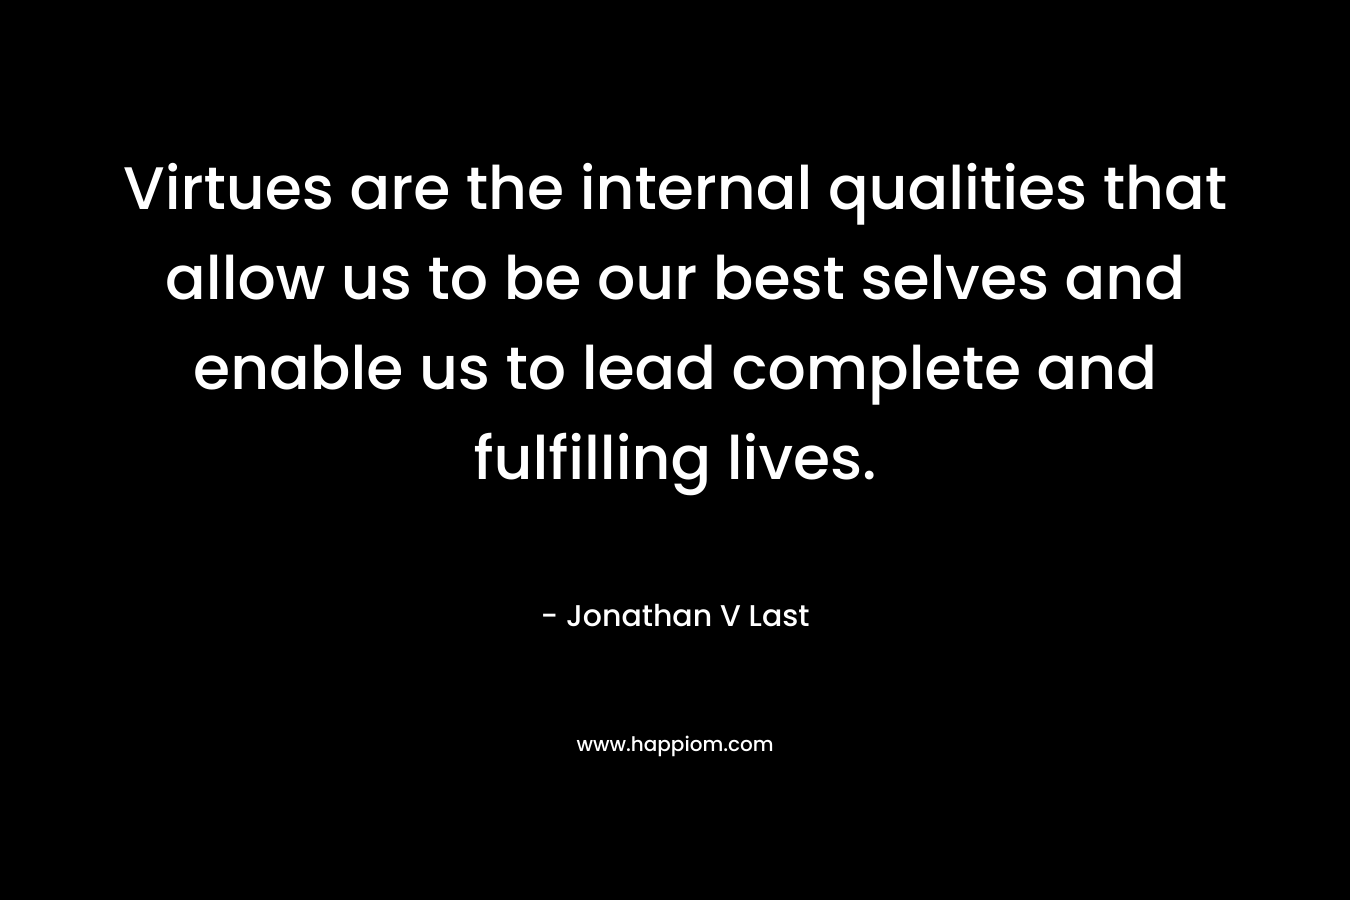 Virtues are the internal qualities that allow us to be our best selves and enable us to lead complete and fulfilling lives. – Jonathan V Last